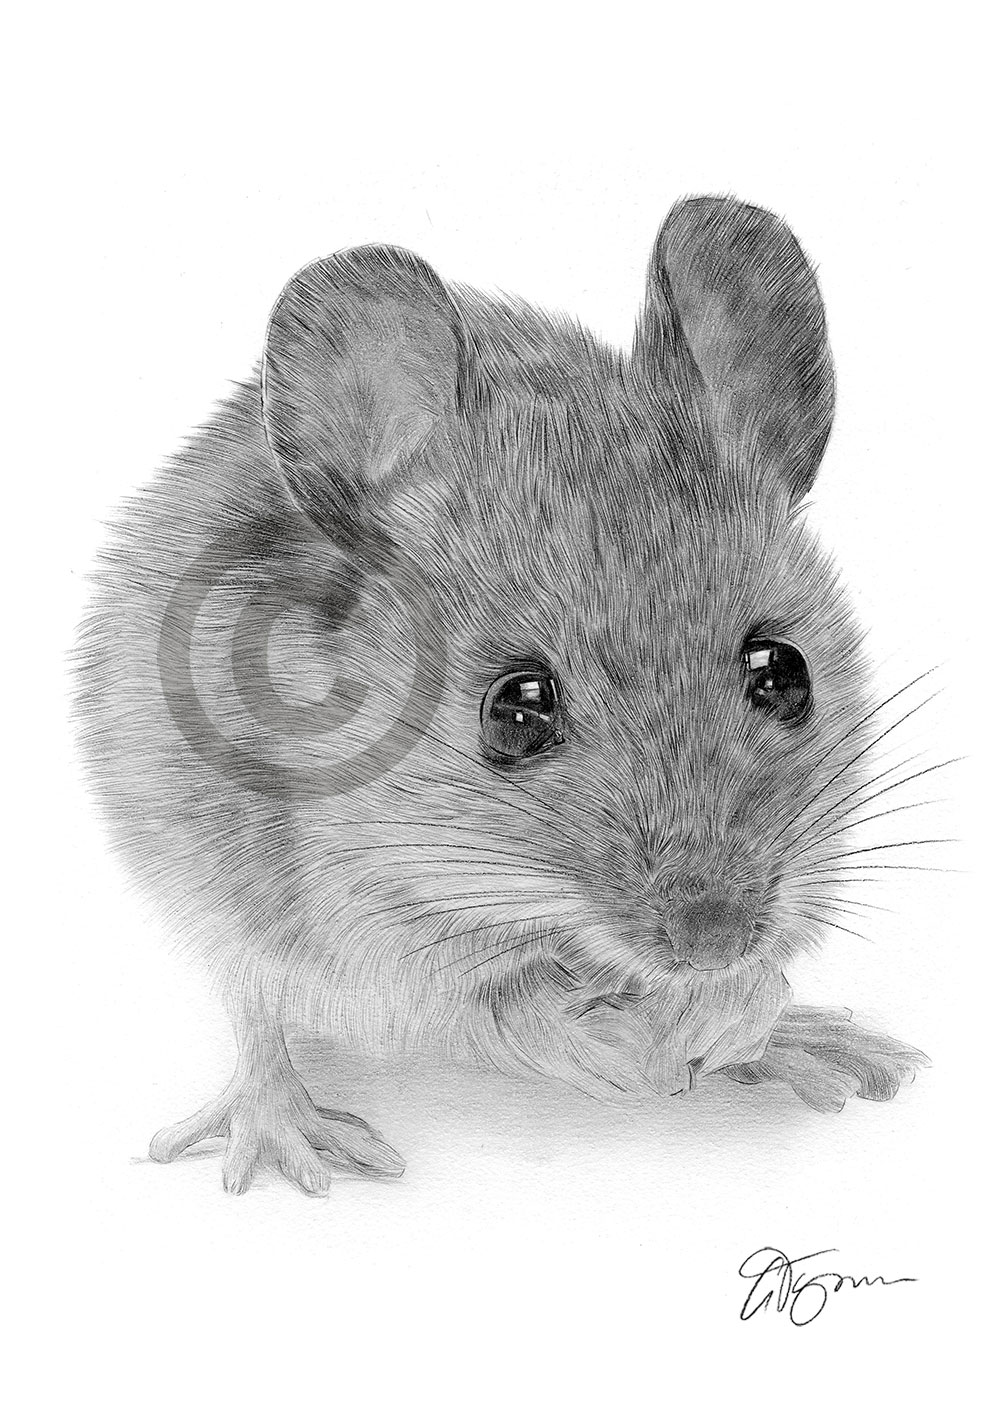 Pencil drawing of a mouse by UK artist Gary Tymon